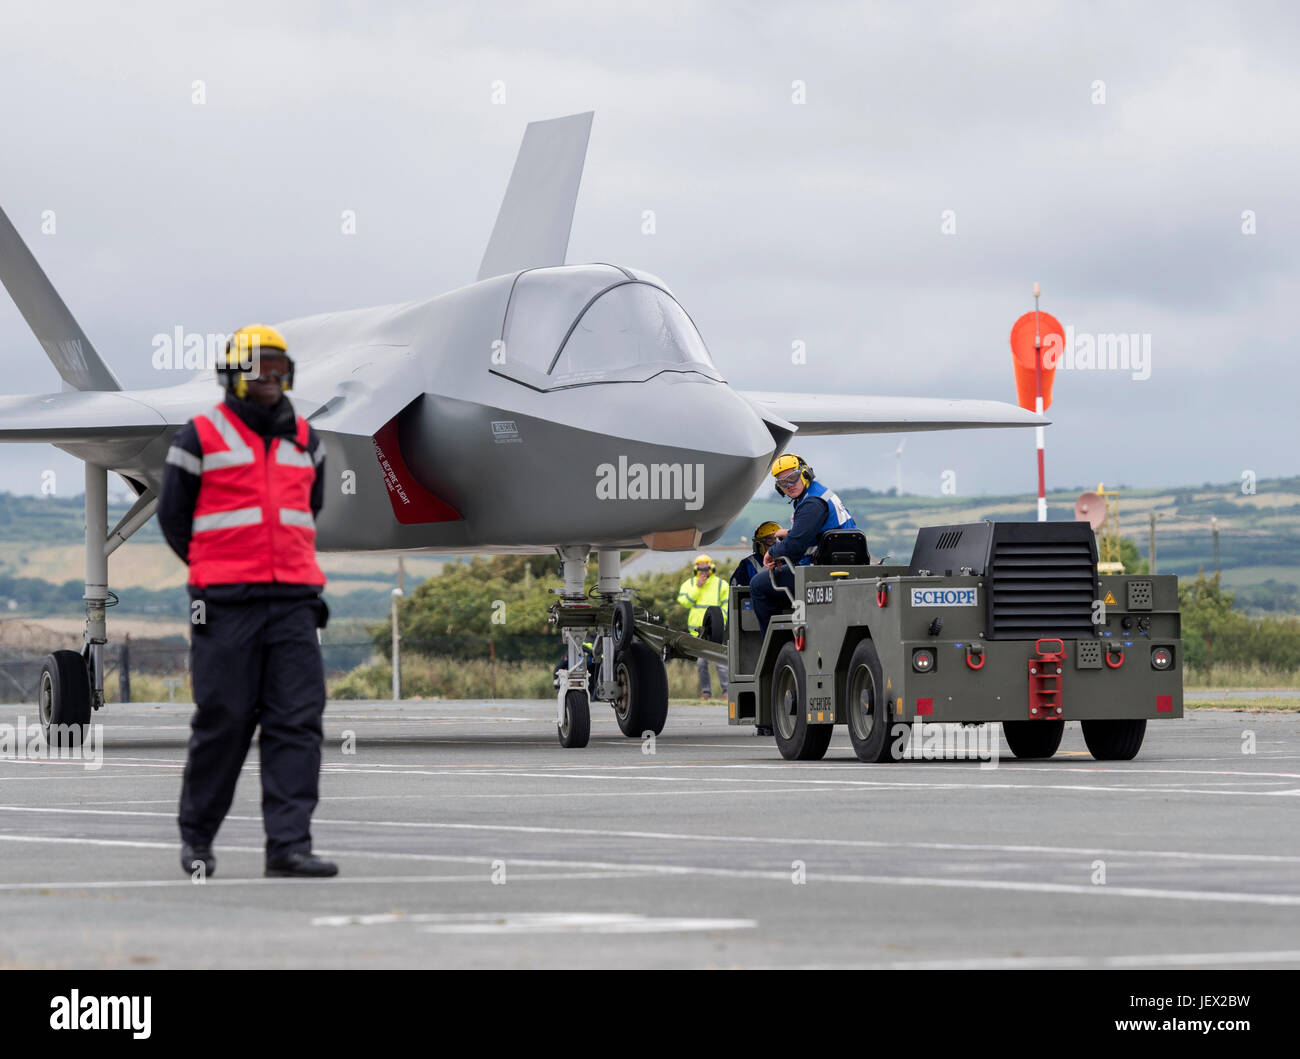 Official Media Assignment at RNAS Culdrose, Helston, Cornwall, UK. 27th June, 2017. Life-size replicas of the Royal Navy F-35B Lightning II jets, during aircraft movements at RNAS Culdrose Dummy Deck facility. These aircraft are used to replicate real F35B aircraft to provide training aids for Royal Navy Aircraft Handlers training to join HMS Queen Elizabeth Credit: Bob Sharples/Alamy Live News Stock Photo